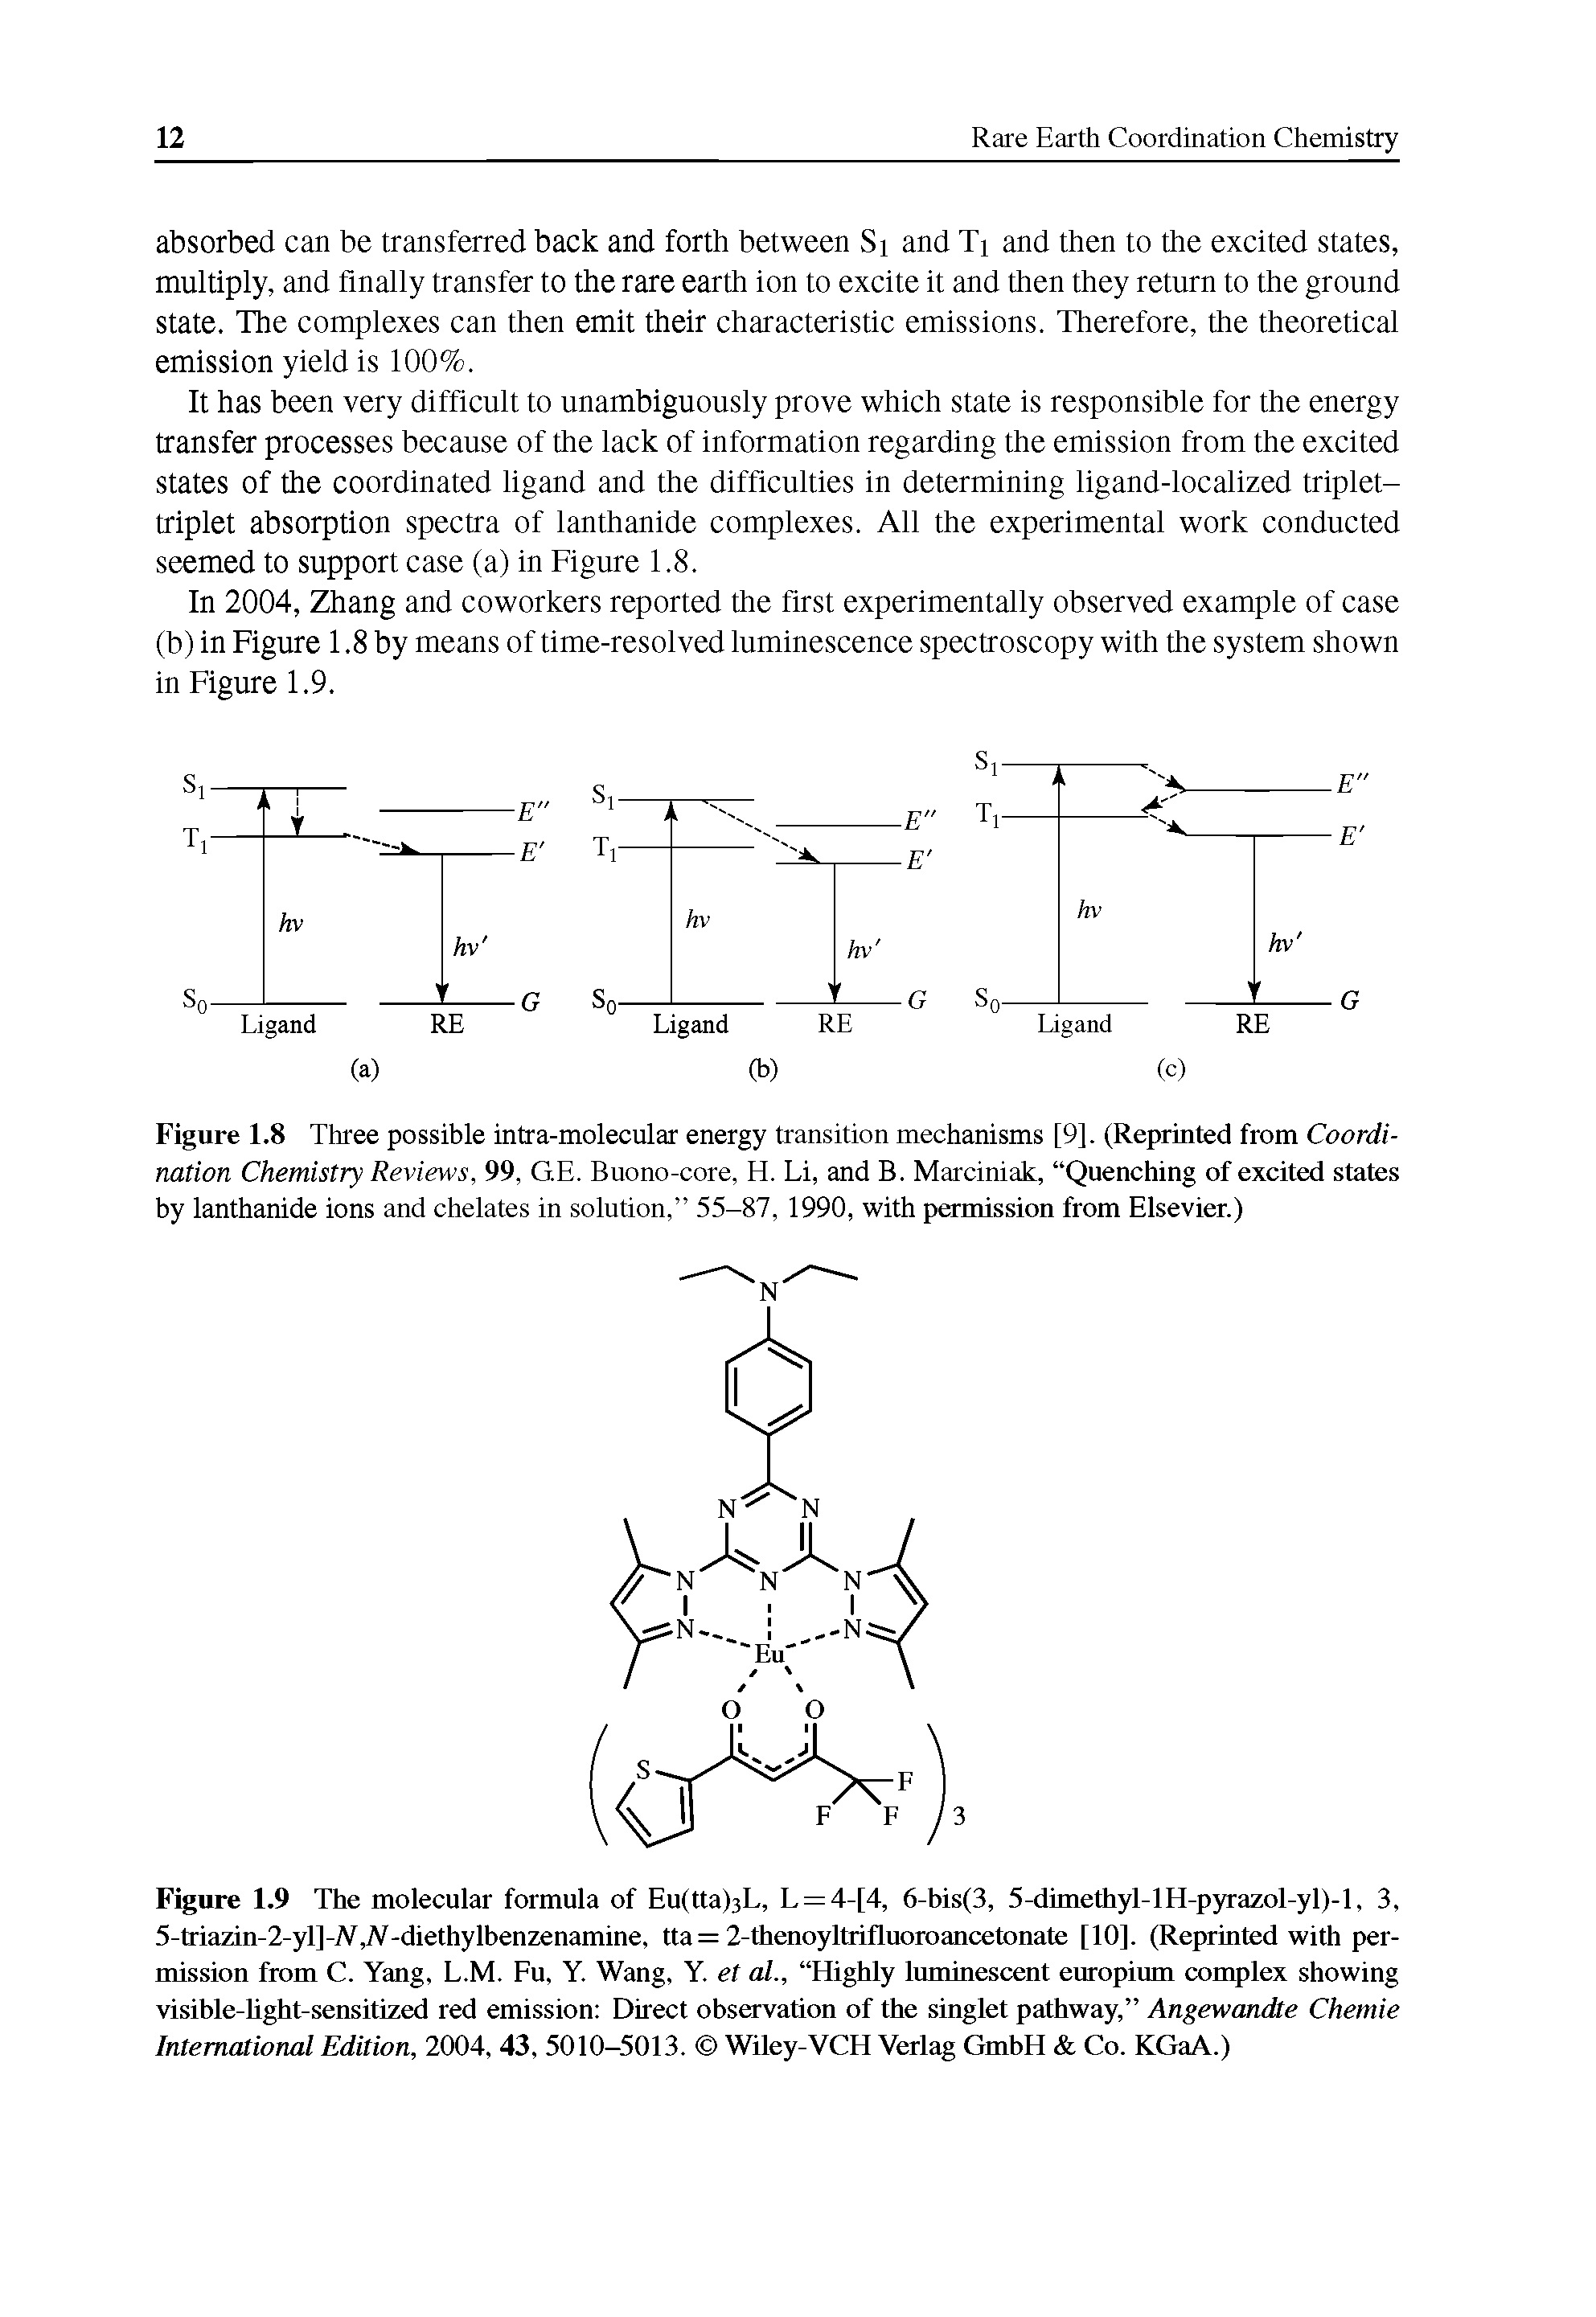 Figure 1.8 Three possible intra-molecular energy transition mechanisms [9]. (Reprinted from Coordination Chemistry Reviews, 99, G.E. Buono-core, H. Li, and B. Marciniak, Quenching of excited states by lanthanide ions and chelates in solution, 55-87, 1990, with permission from Elsevier.)...